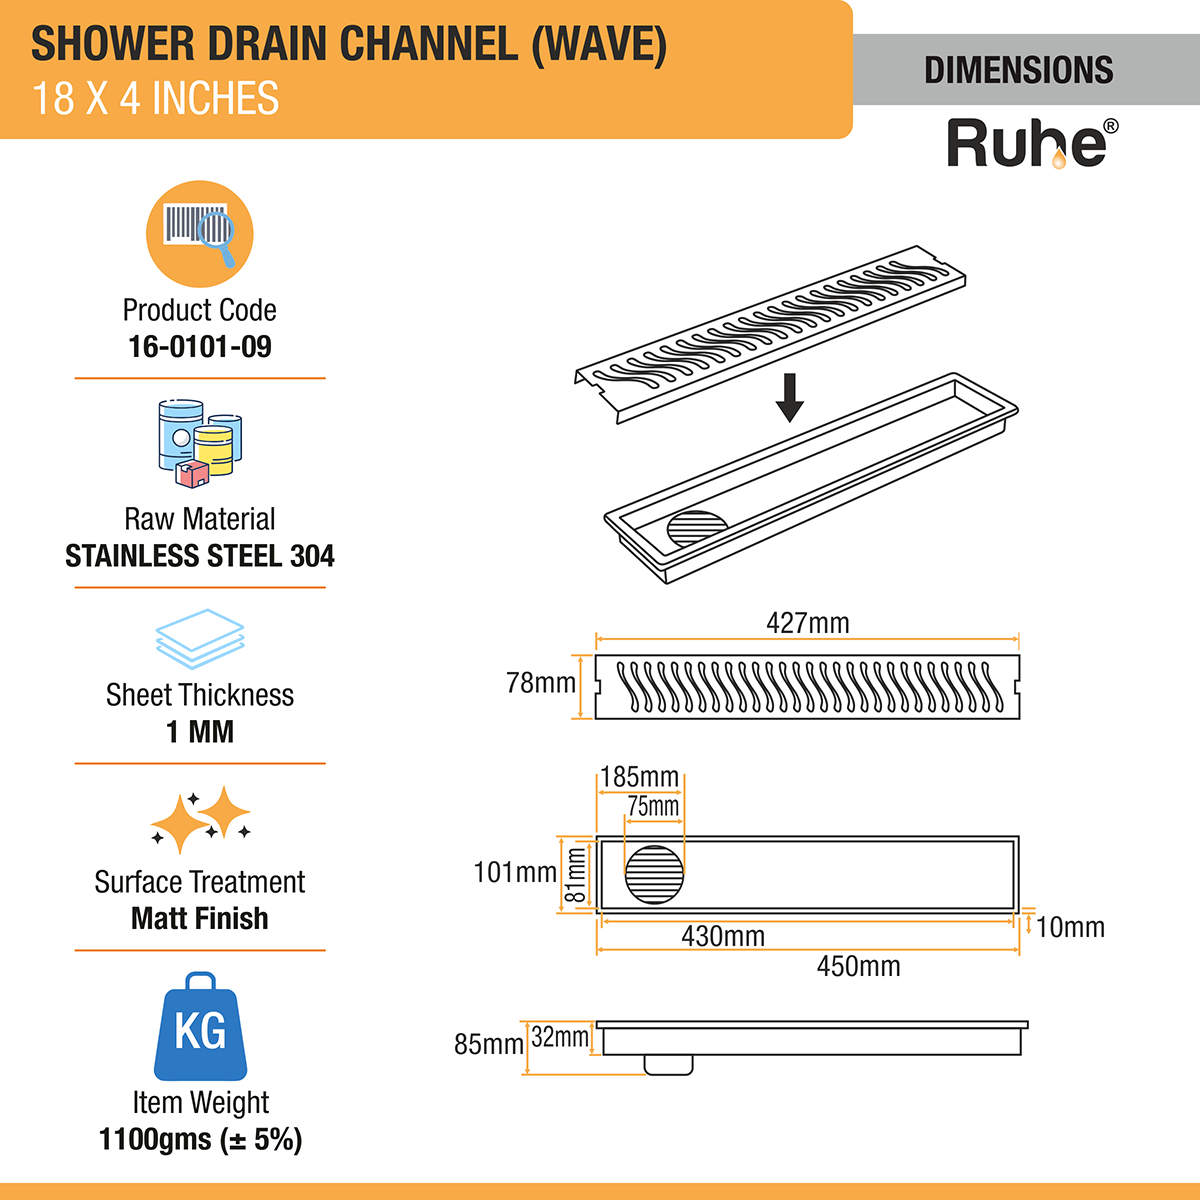 Wave Shower Drain Channel (18 X 4 Inches) with Cockroach Trap (304 Grade) dimensions and size